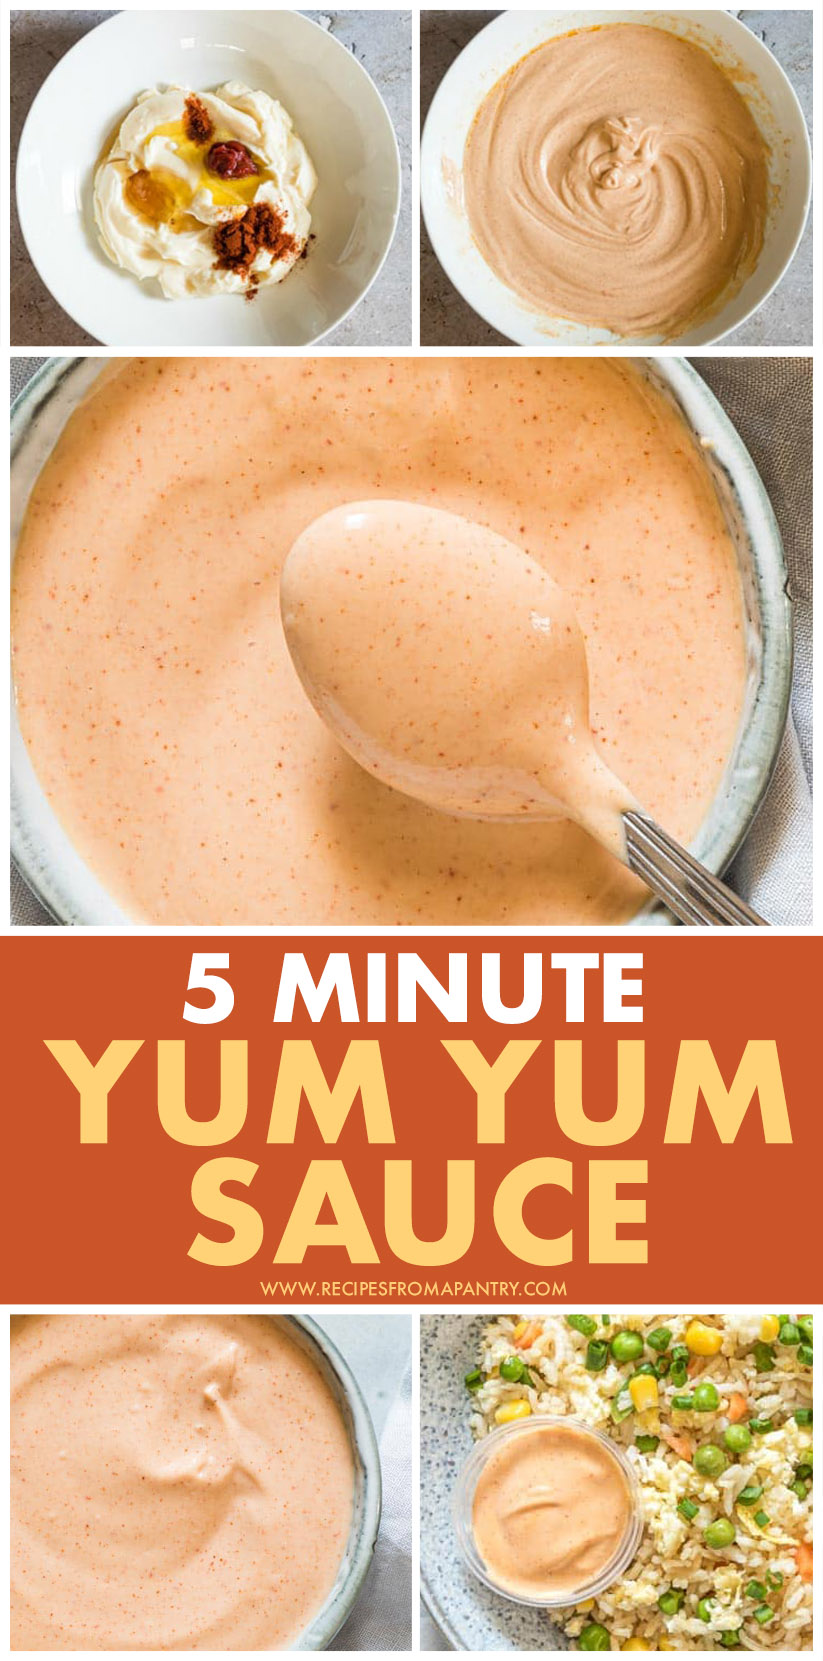 5 Minutes Yum Yum Sauce (GF) - Recipes From A Pantry